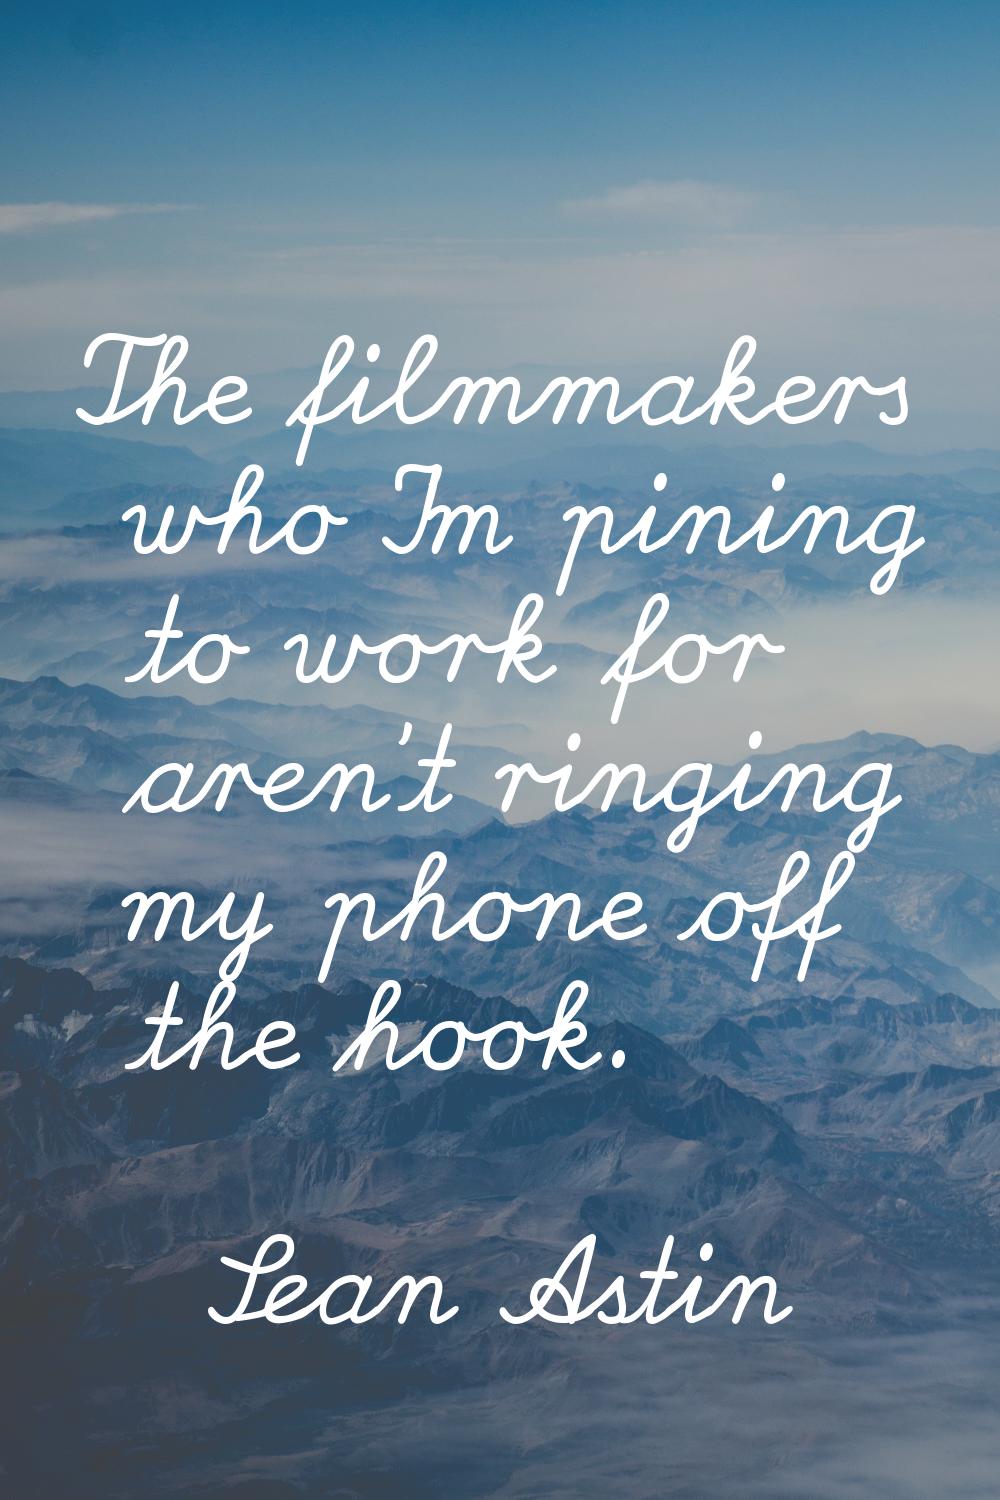 The filmmakers who I'm pining to work for aren't ringing my phone off the hook.